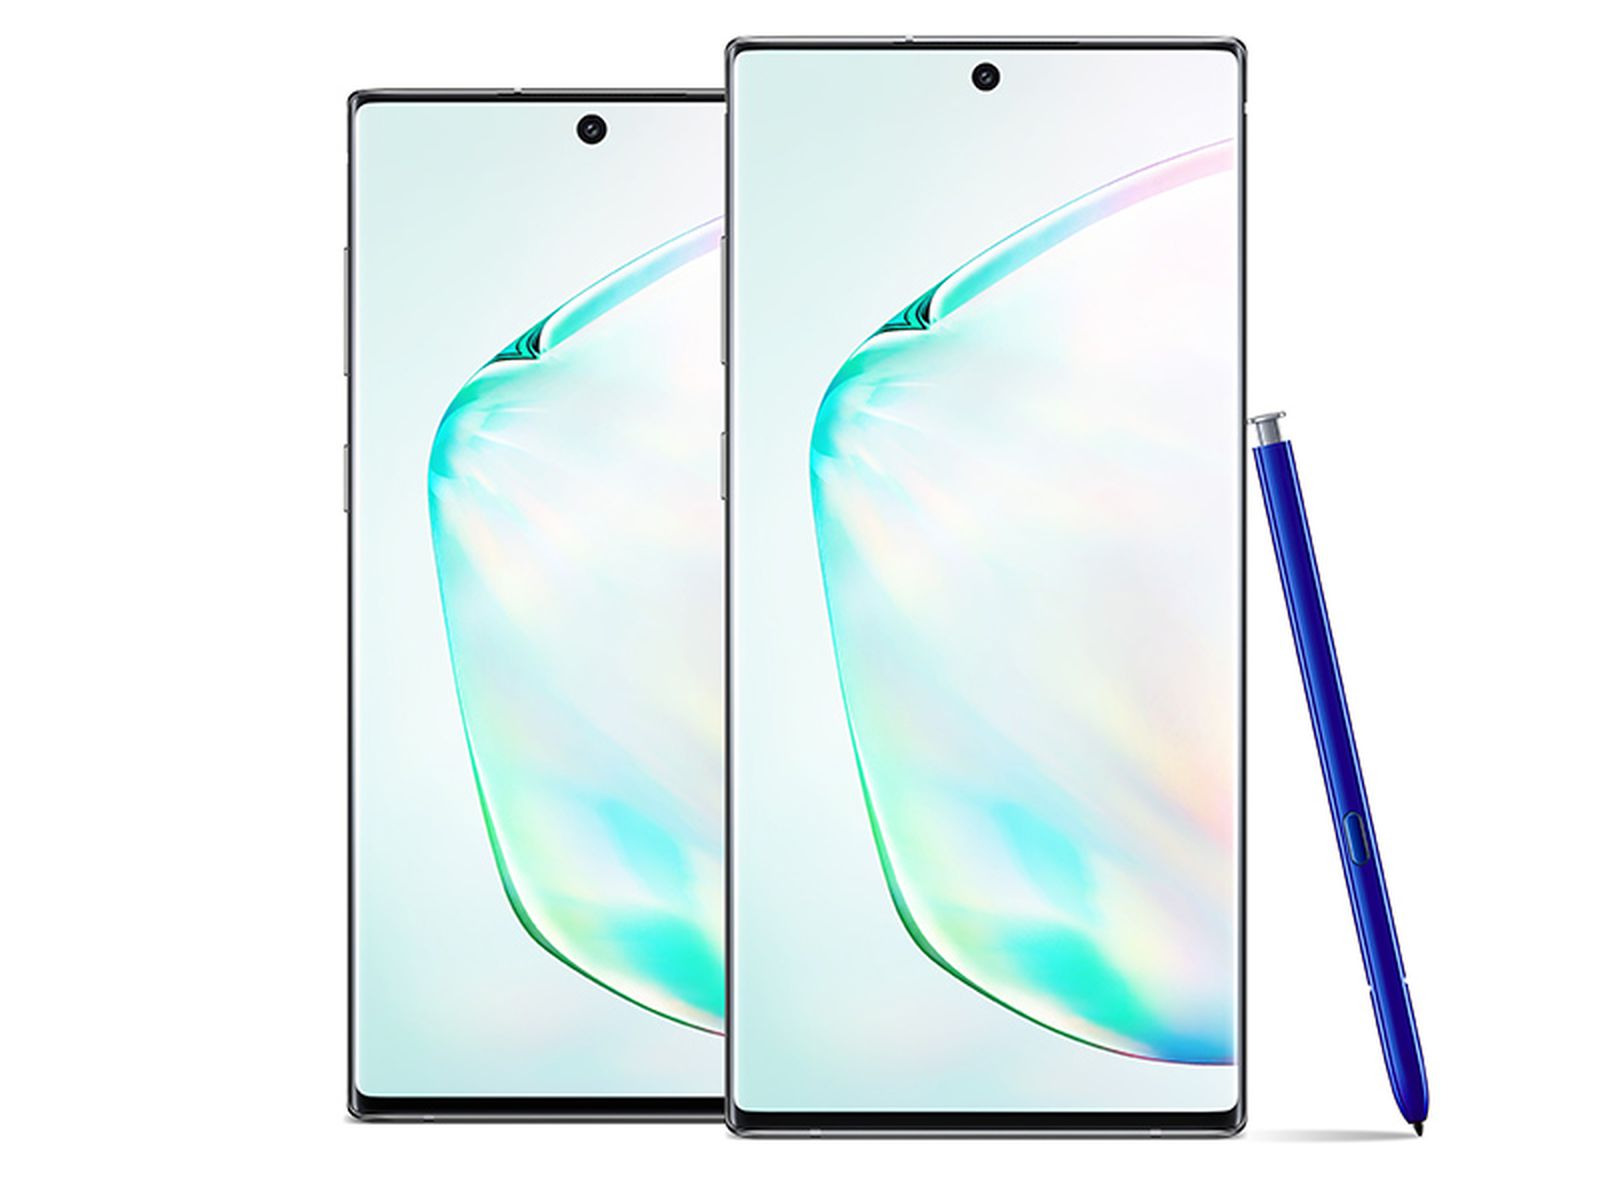 New Samsung Galaxy Note 10 5G renders point to a stunning flagship